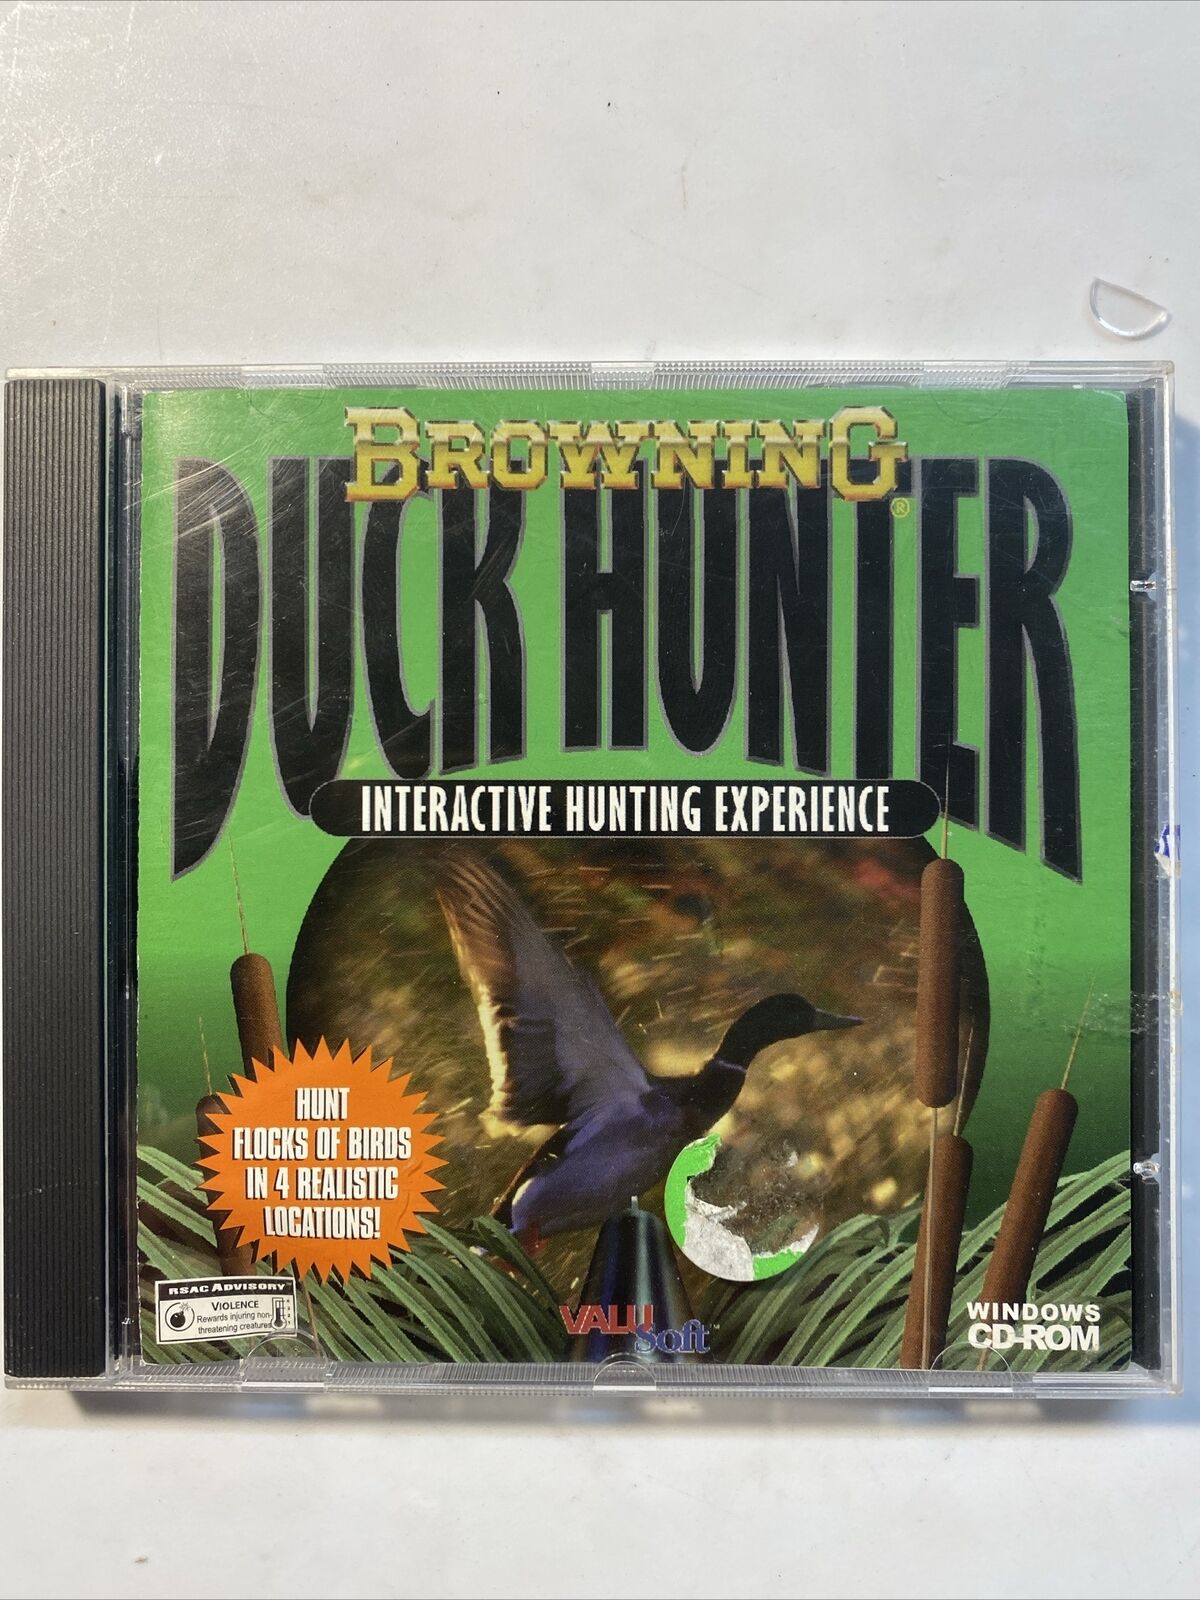 BROWNING DUCK HUNTER PC GAME Fast Shipping